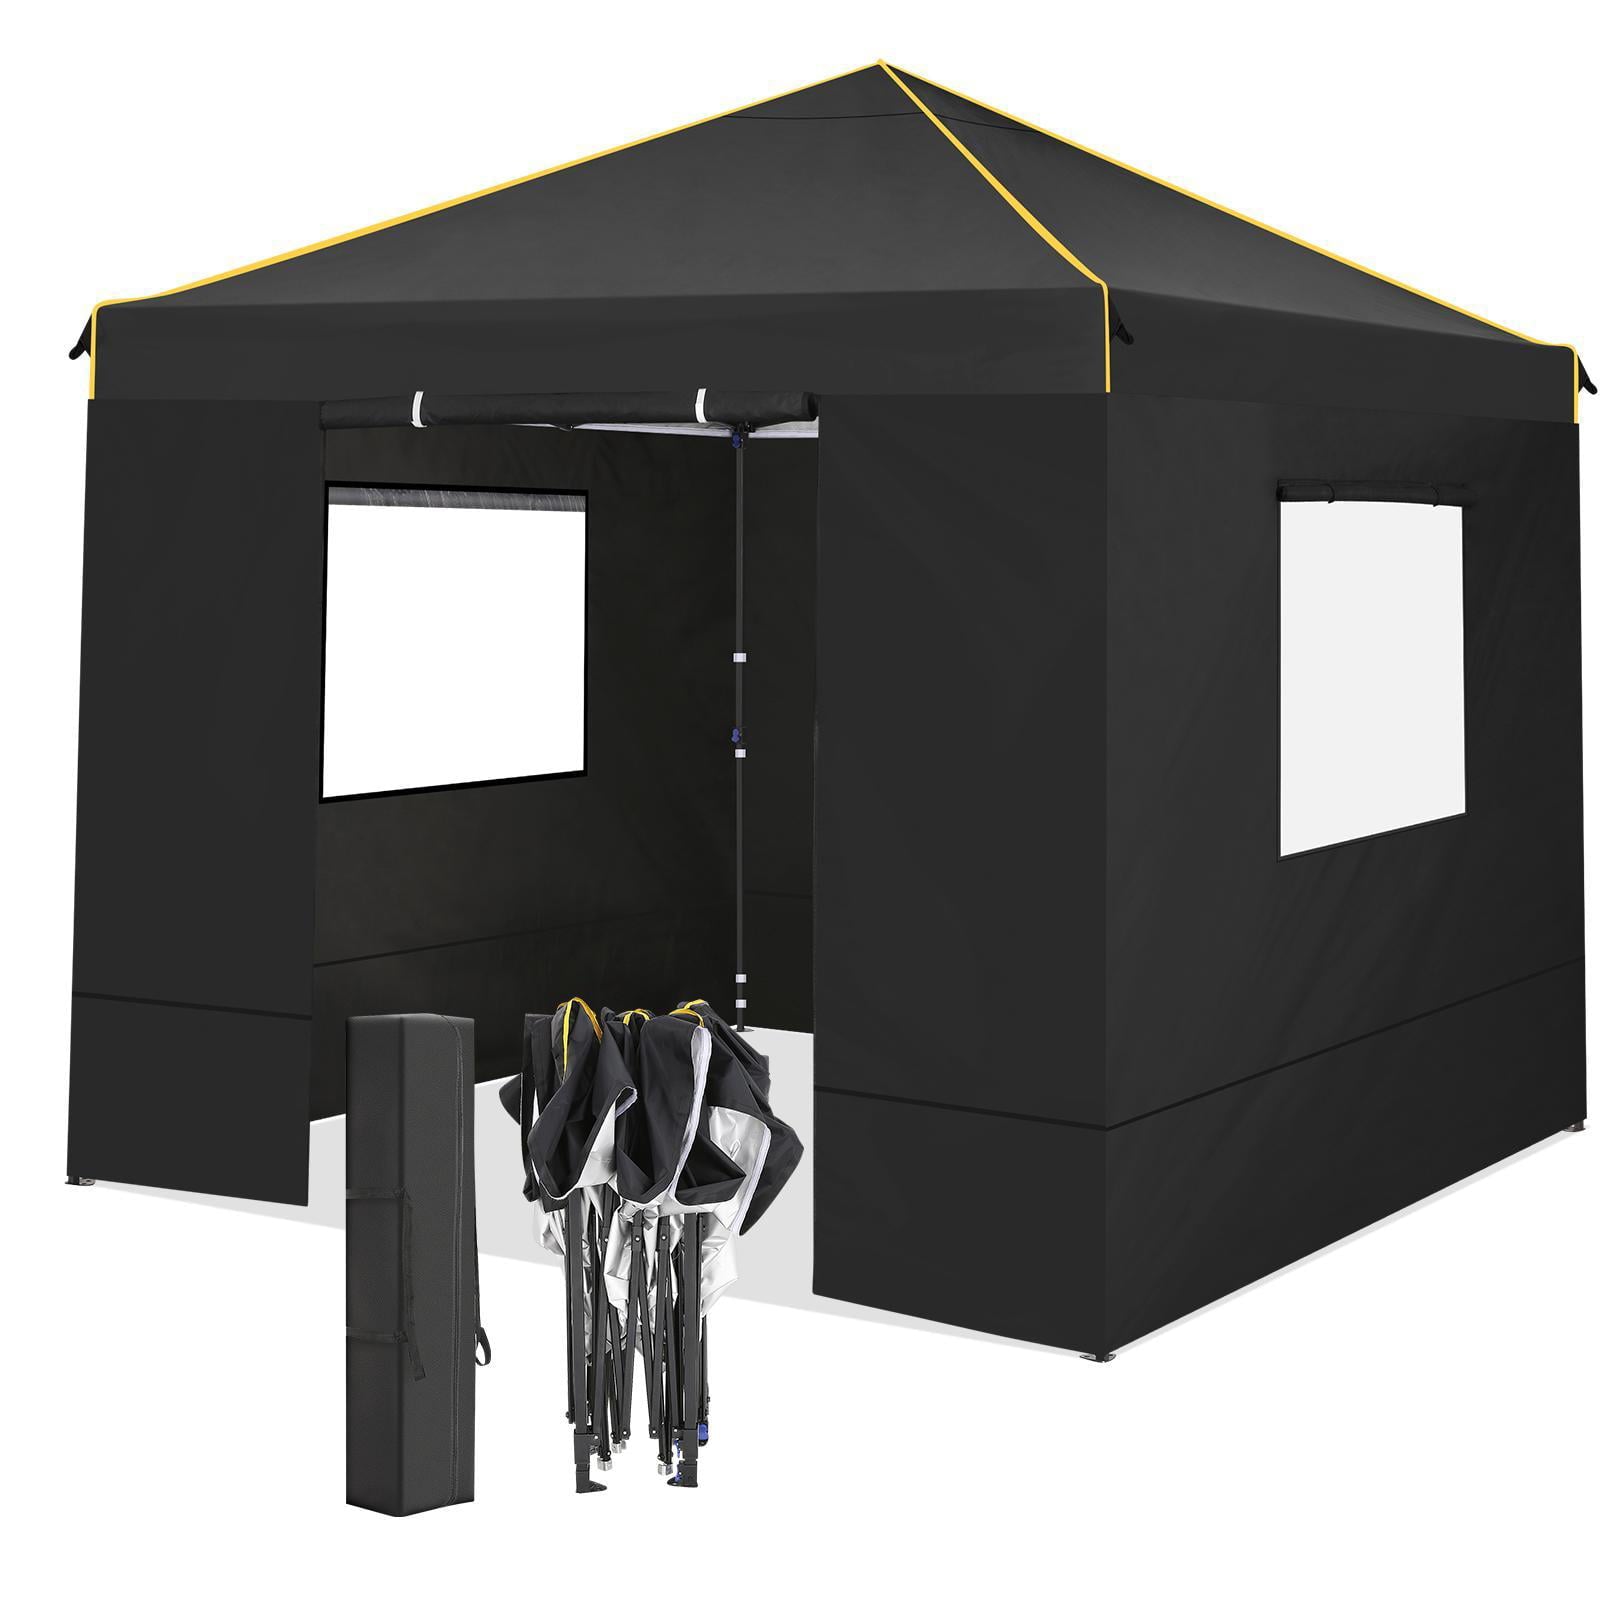 Sihanm 10'x10' Outdoor Canopy Tent Gazebo - Pop Up Instant Canopy with Waterproof and UV Protection - Patio Gazebo for Backyard, Outdoor, Patio and Lawn Clearance Sale Black